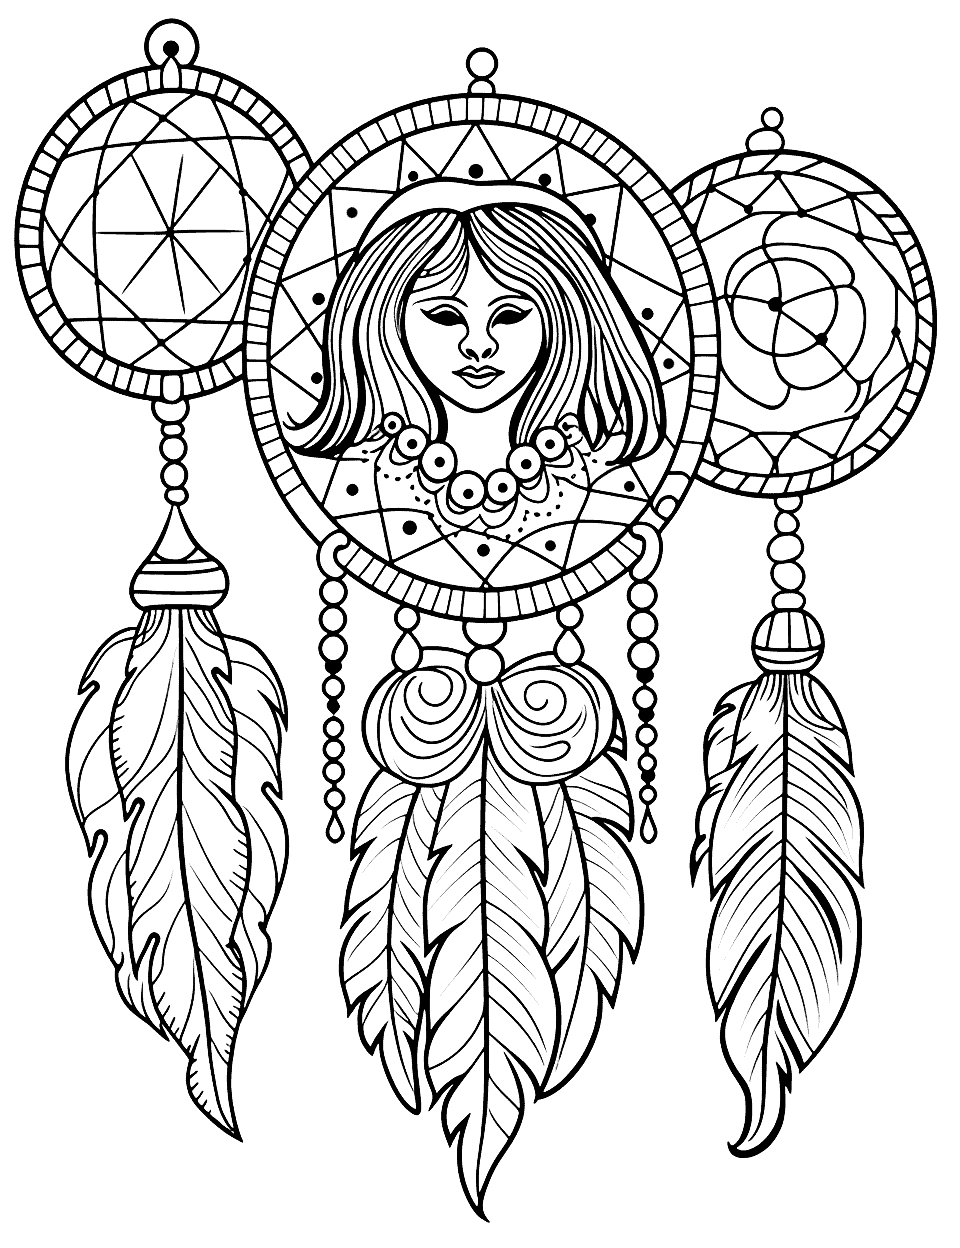 Dream Catcher Doodles Adult Coloring Page - Doodle-style dream catchers with intricate details.